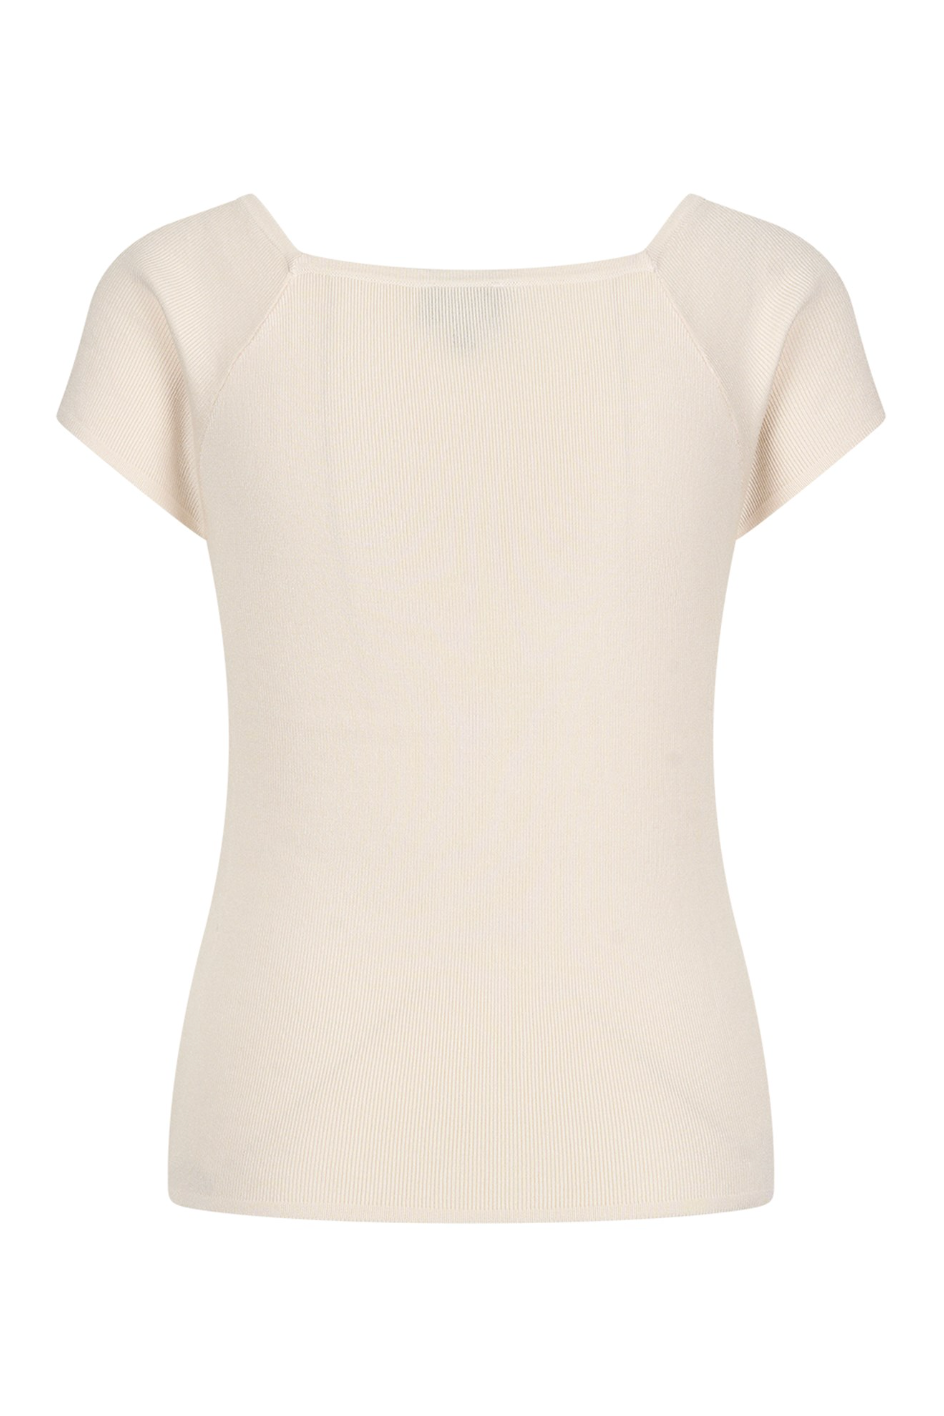 Zilch Short Sleeve Top in Off White-Womens-Ohh! By Gum - Shop Sustainable